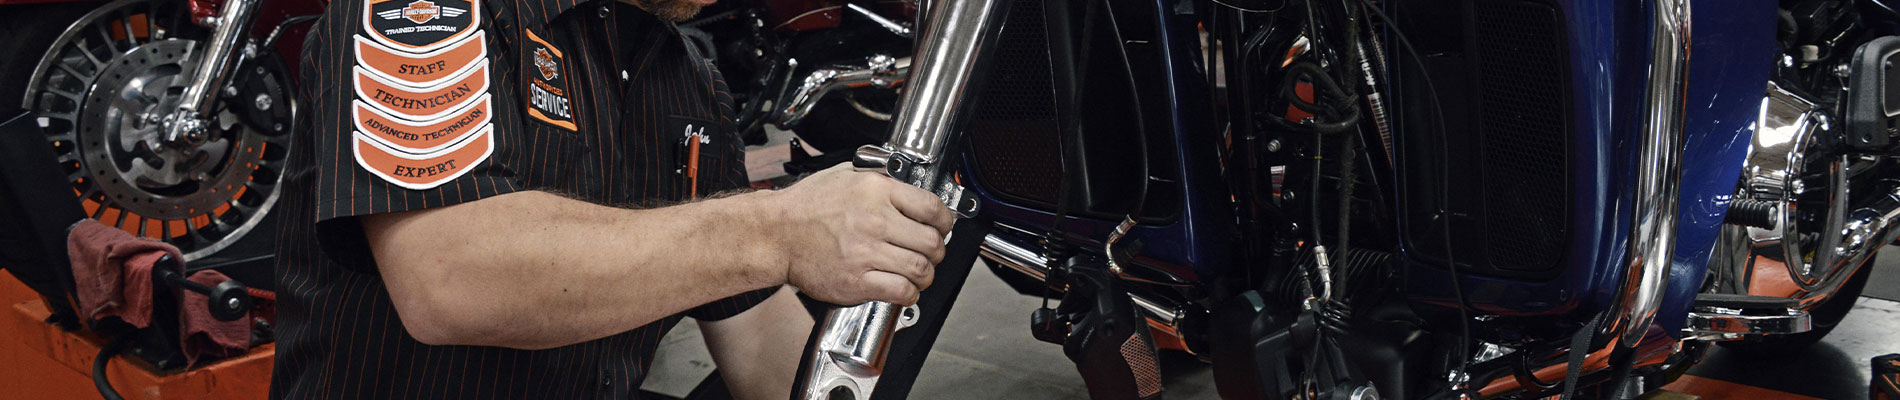 Get Service for your Harley-Davidson Motorcycle